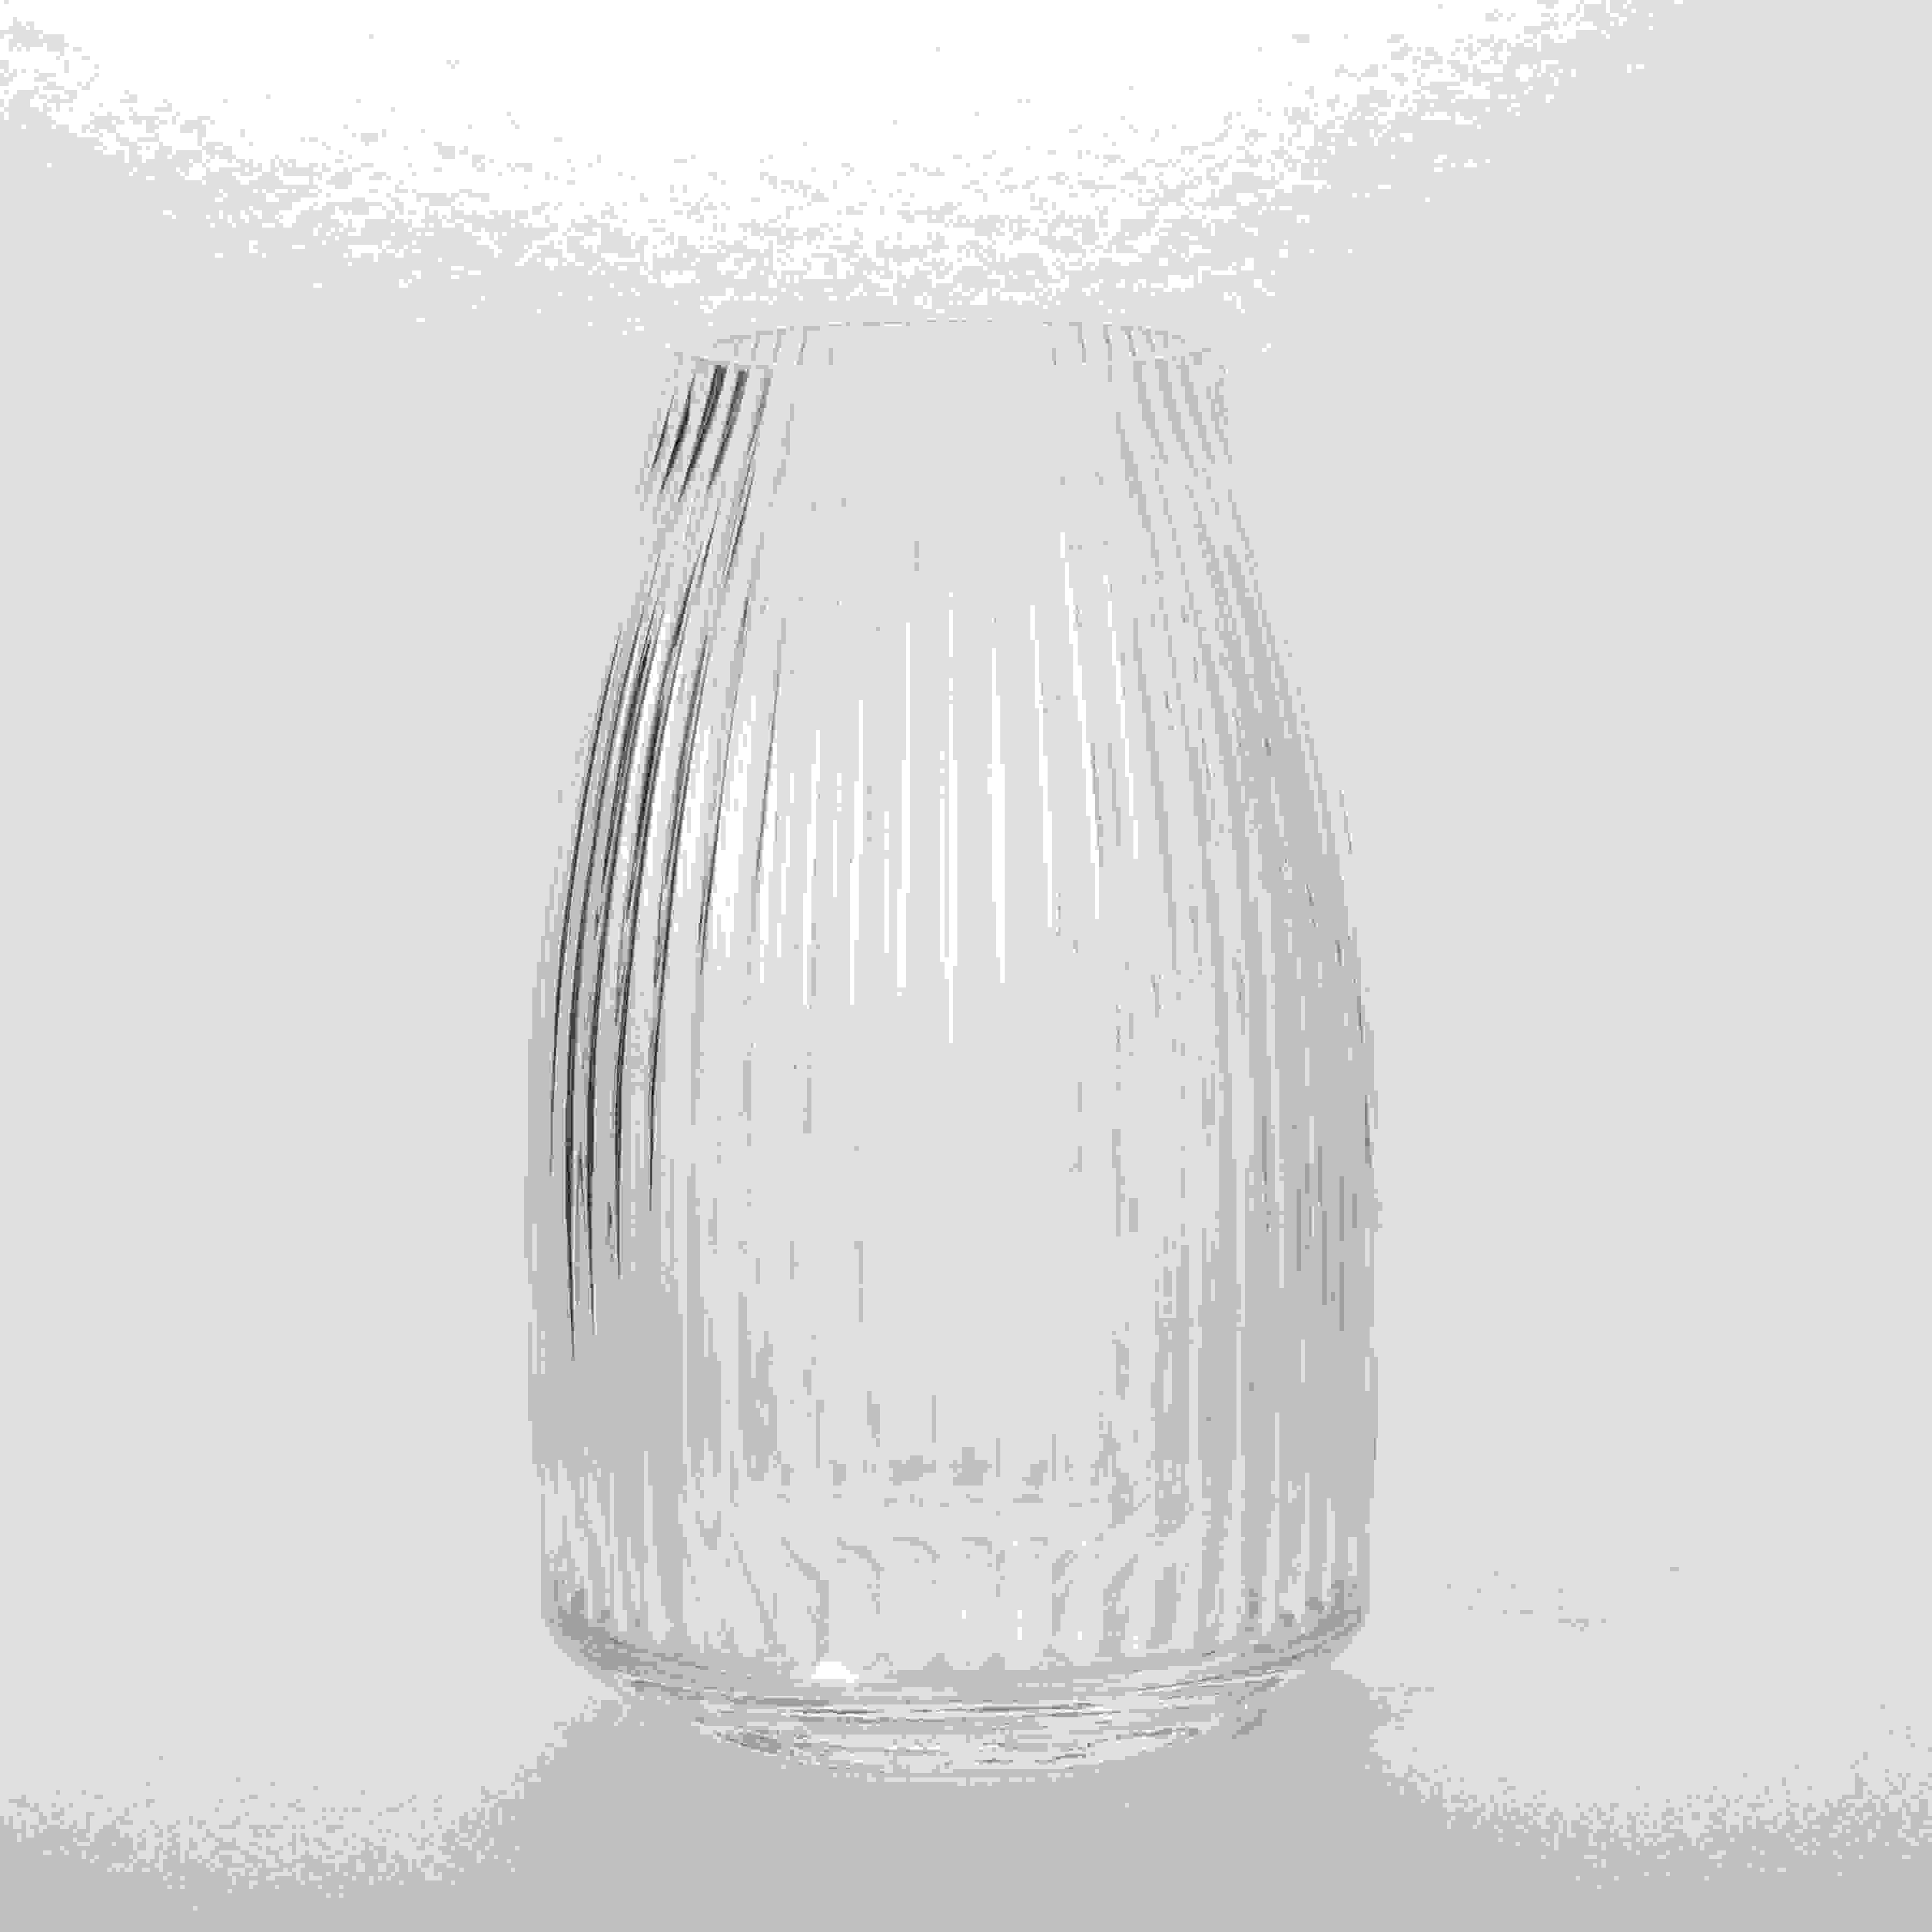 RIBBED CLEAR VASE